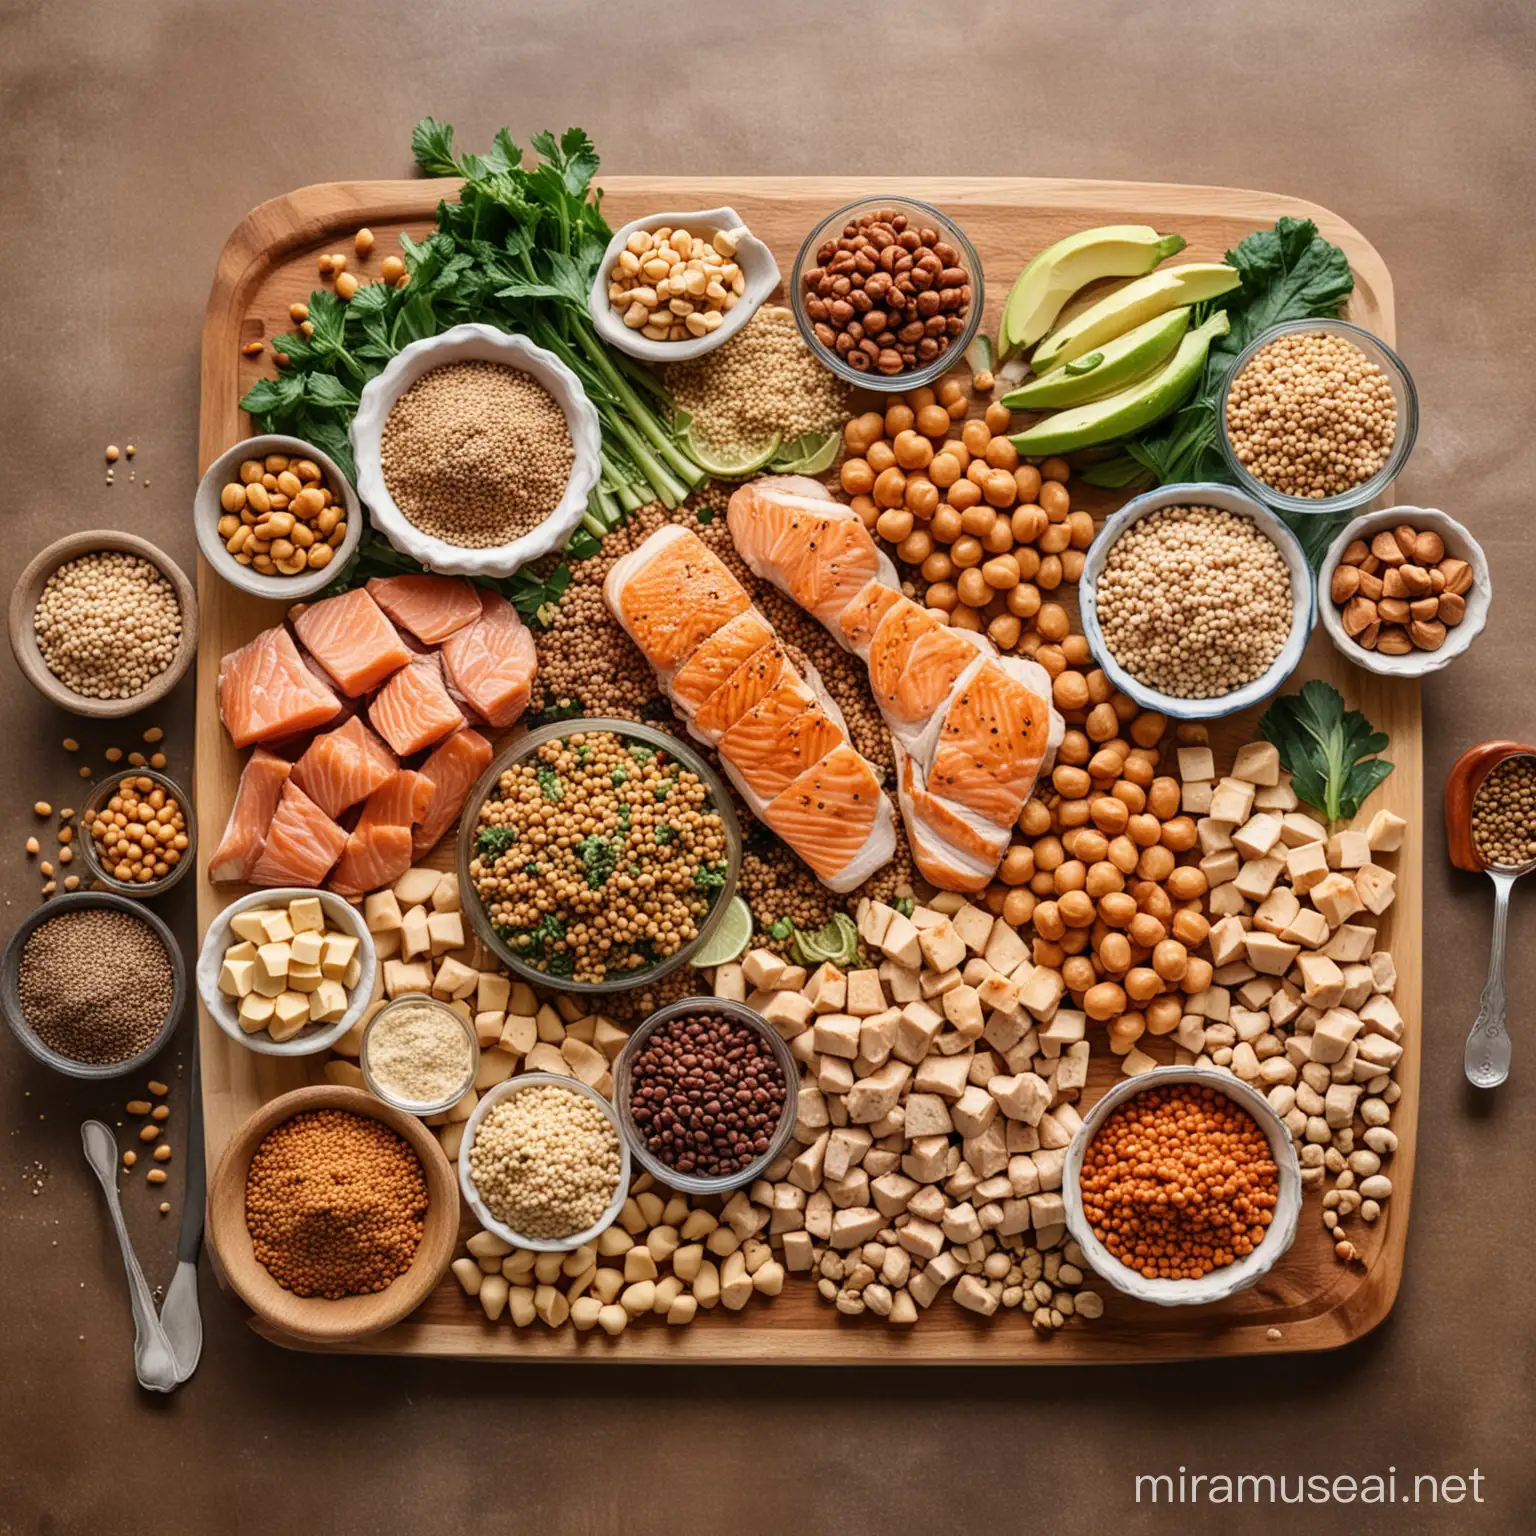 An image featuring a colorful spread of various protein-rich foods arranged on a table or cutting board. Include items such as grilled chicken breast, salmon fillets, tofu cubes, chickpeas, lentils, quinoa, nuts, and seeds. This image showcases both animal and plant-based protein sources, emphasizing the importance of dietary diversity in meeting athletes' protein needs